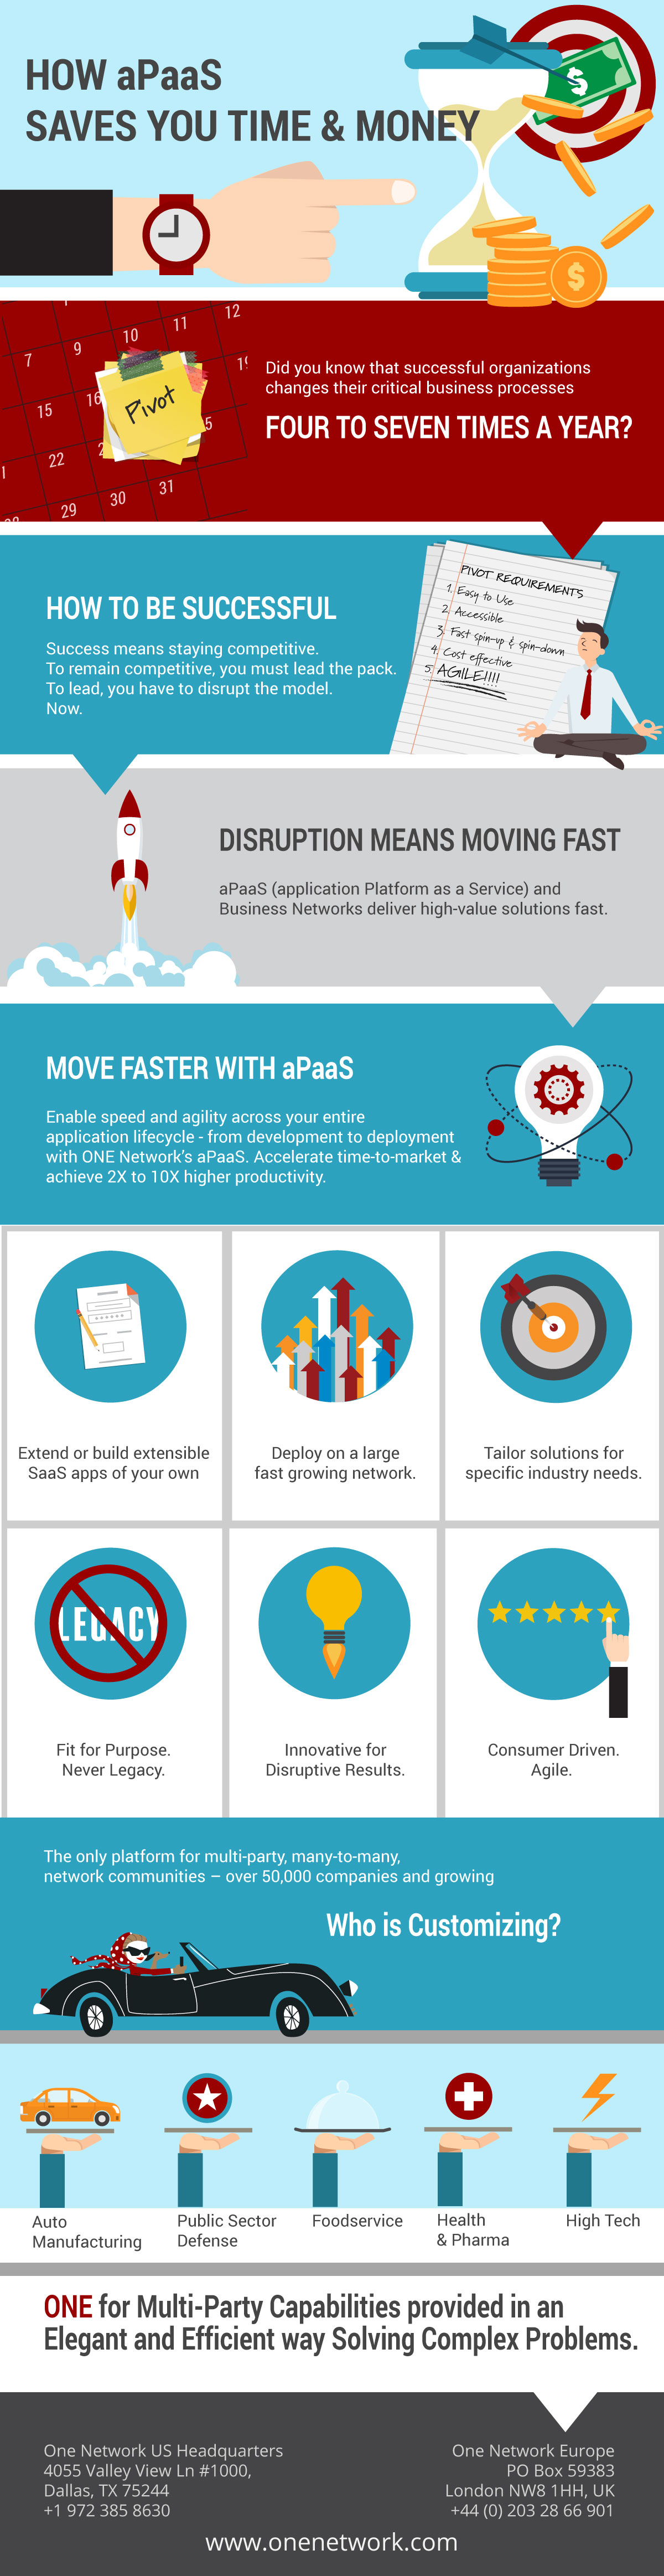 What is aPaaS? Why all the buzz?